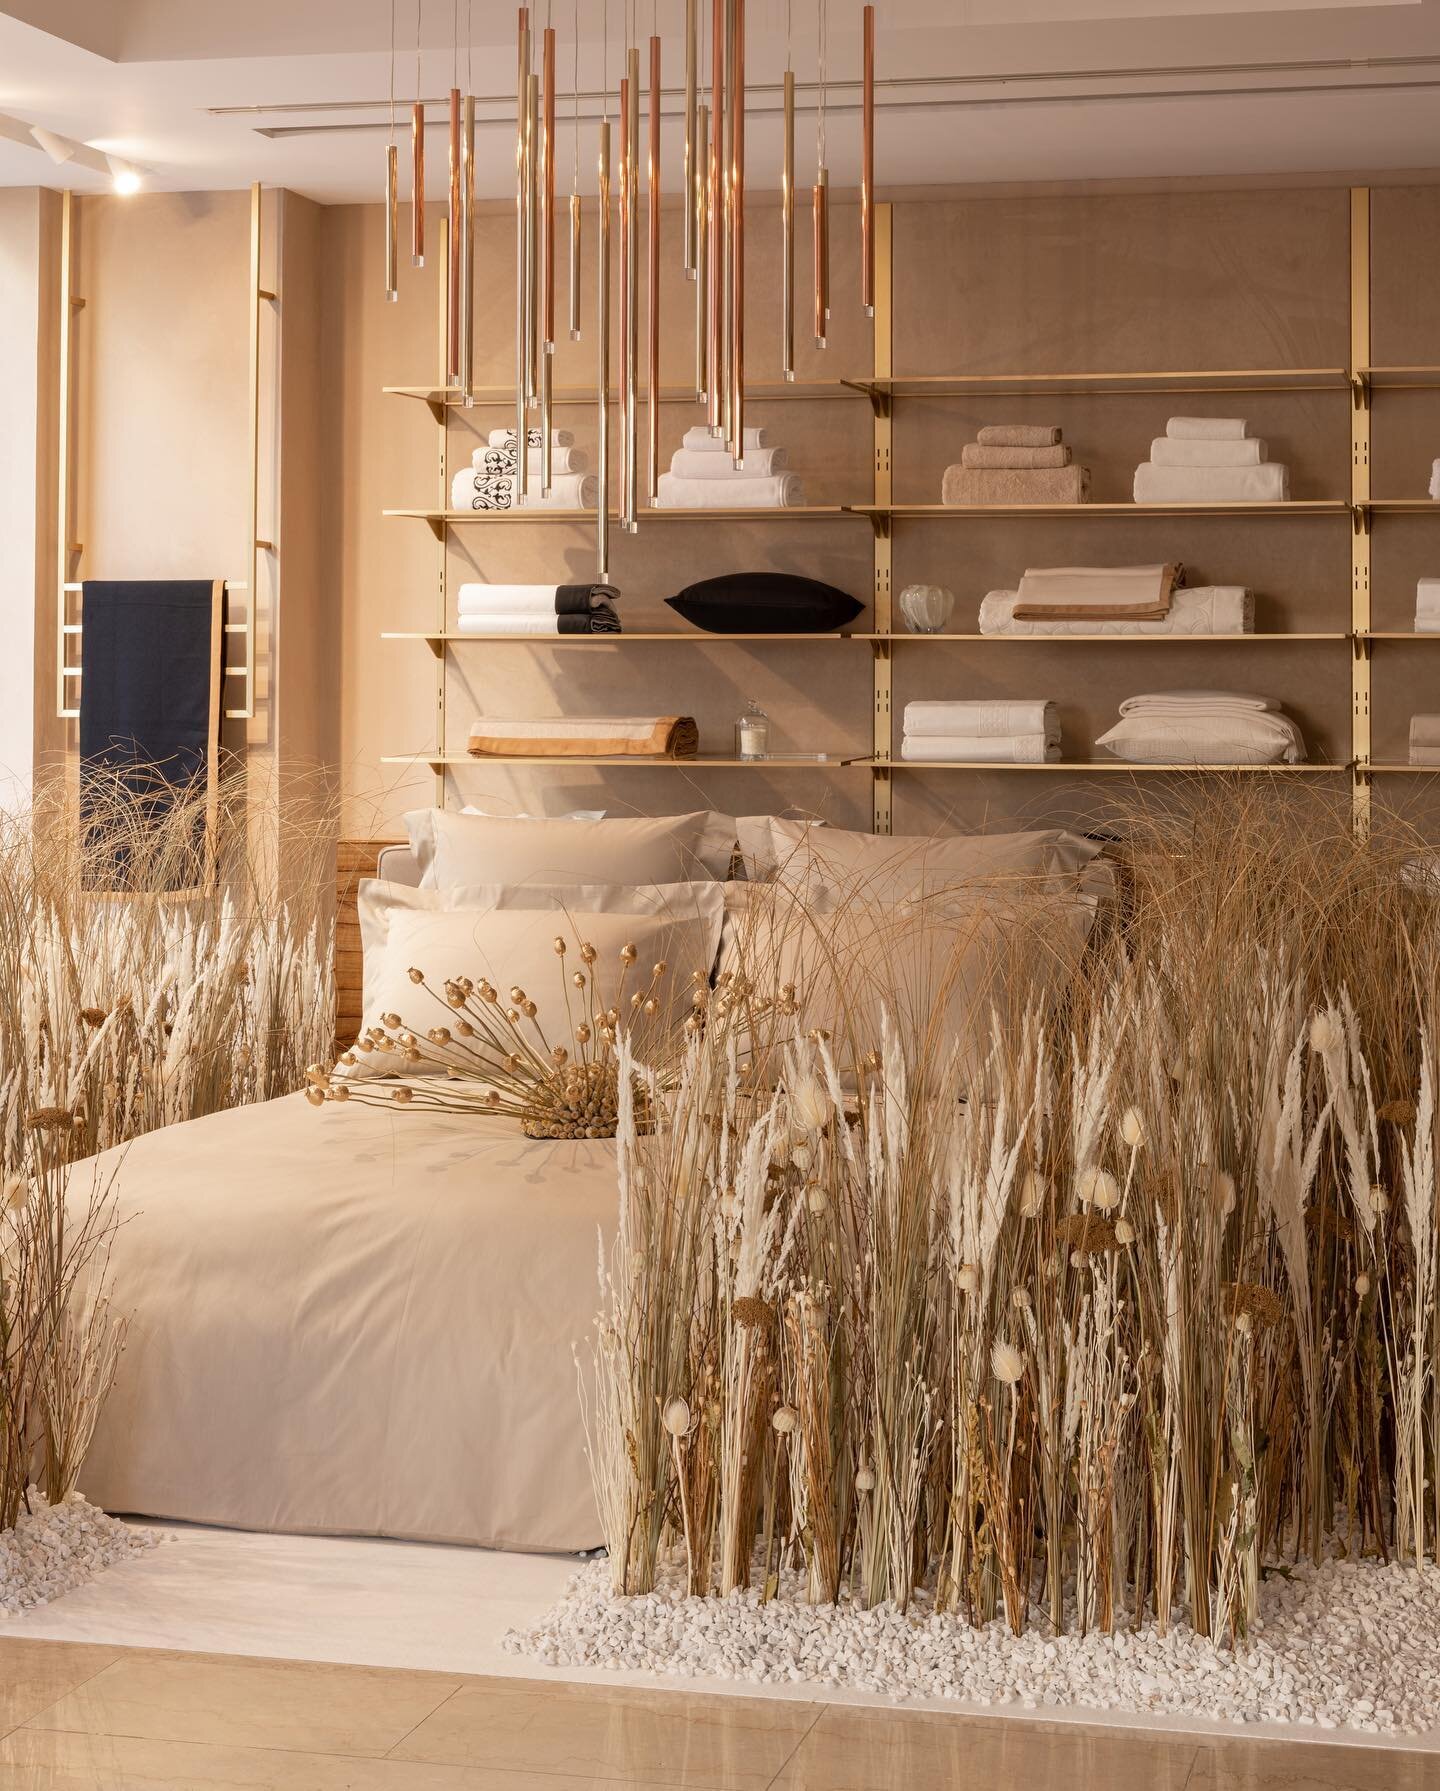 Last week to discover the installation by the artist @lucy_artvegetal for the launch of Naturalismo capsule collection of organic and sustainable bed linens @fretteofficial 

📍49 Rue du Faubourg Saint-Honor&eacute;
75008 Paris

📷 by @paul_blind 

#